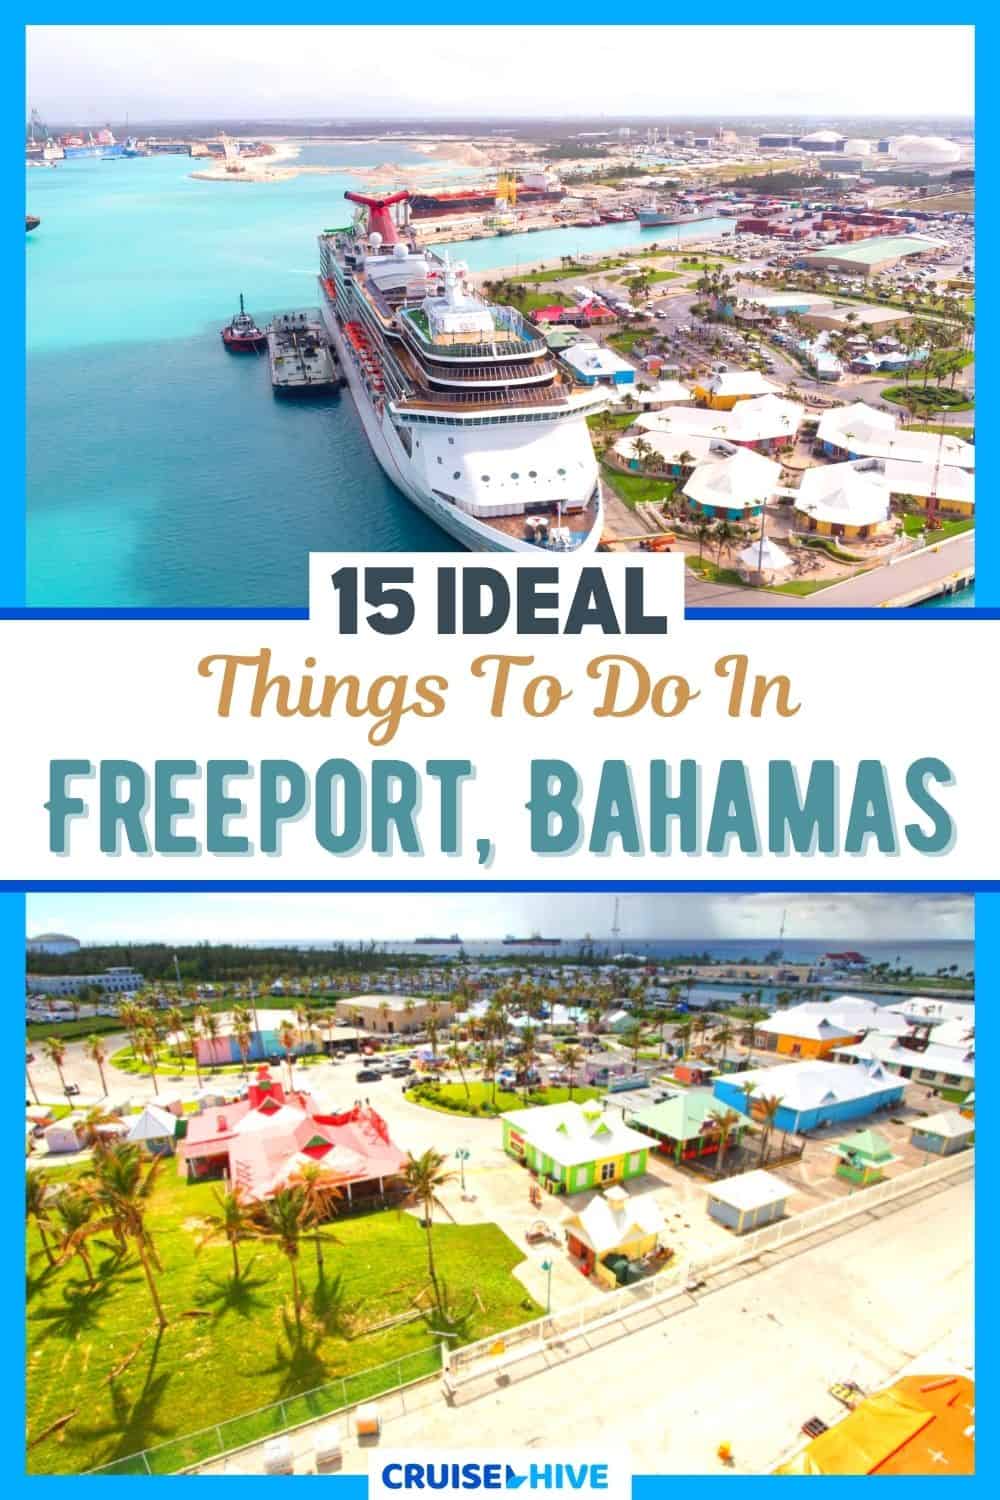 Things to do in Freeport Bahamas